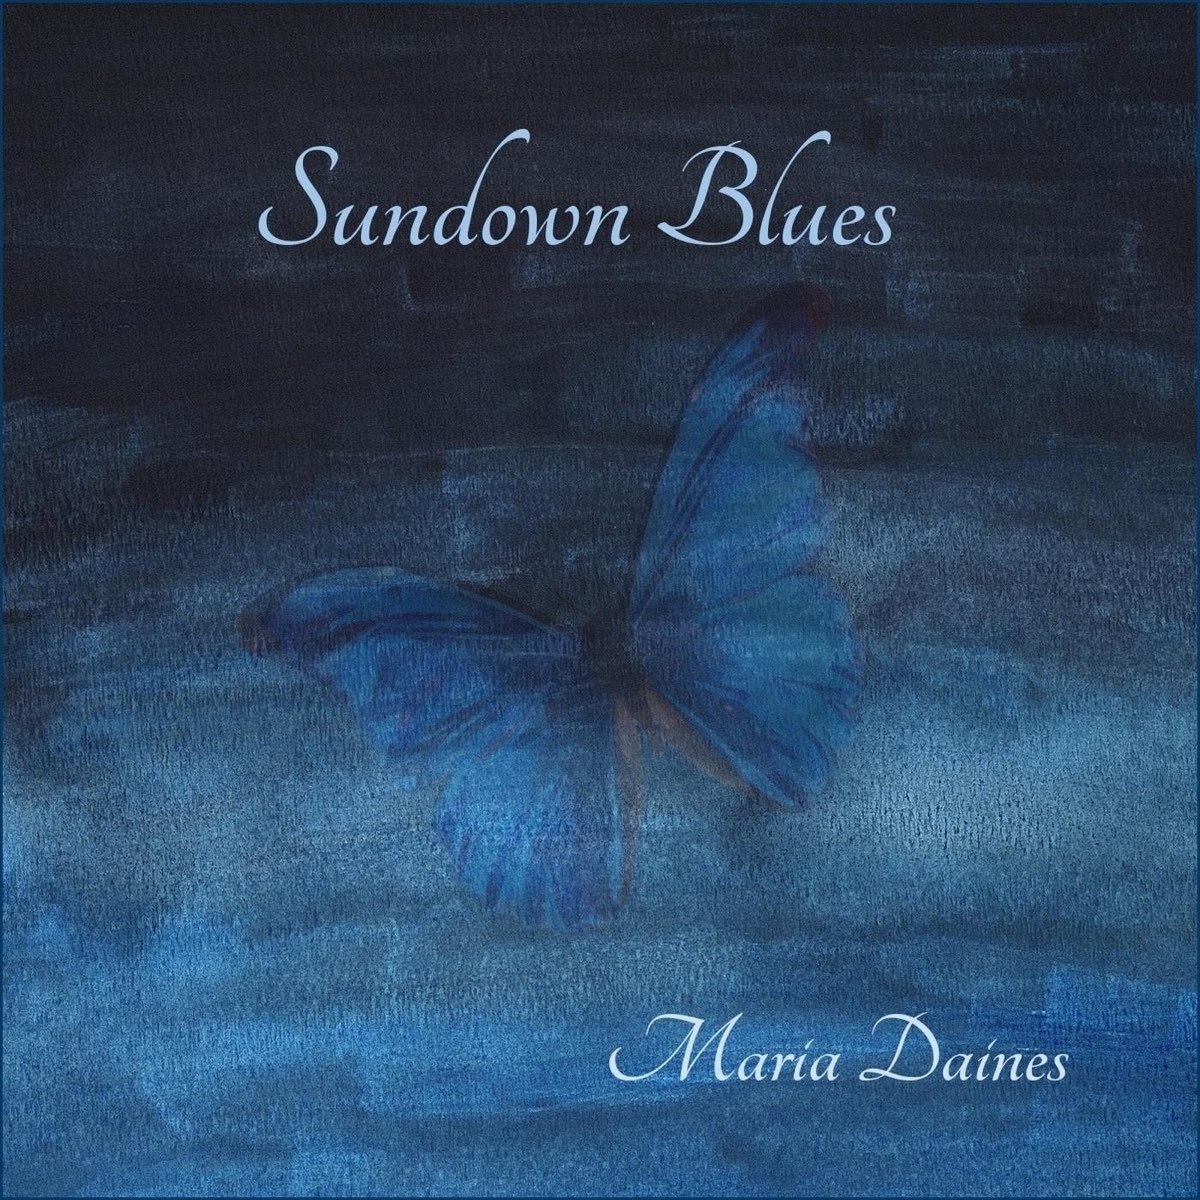 Night for the Lonely Maria Daines. Maria blues